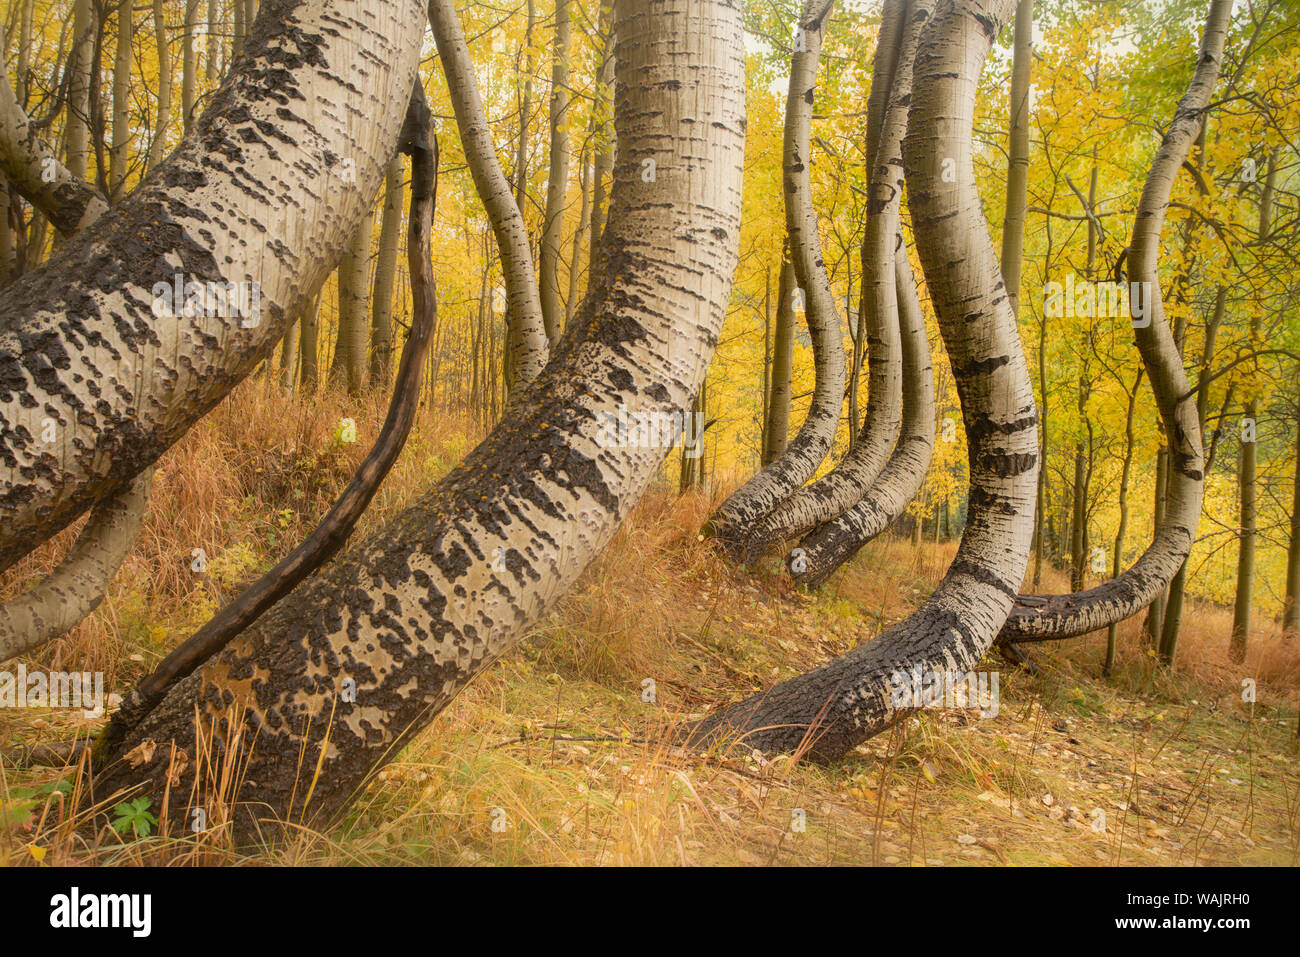 USA, Colorado, Uncompahgre National Forest. Deformed aspen trunks in forest. Credit as: Don Grall / Jaynes Gallery / DanitaDelimont.com Stock Photo